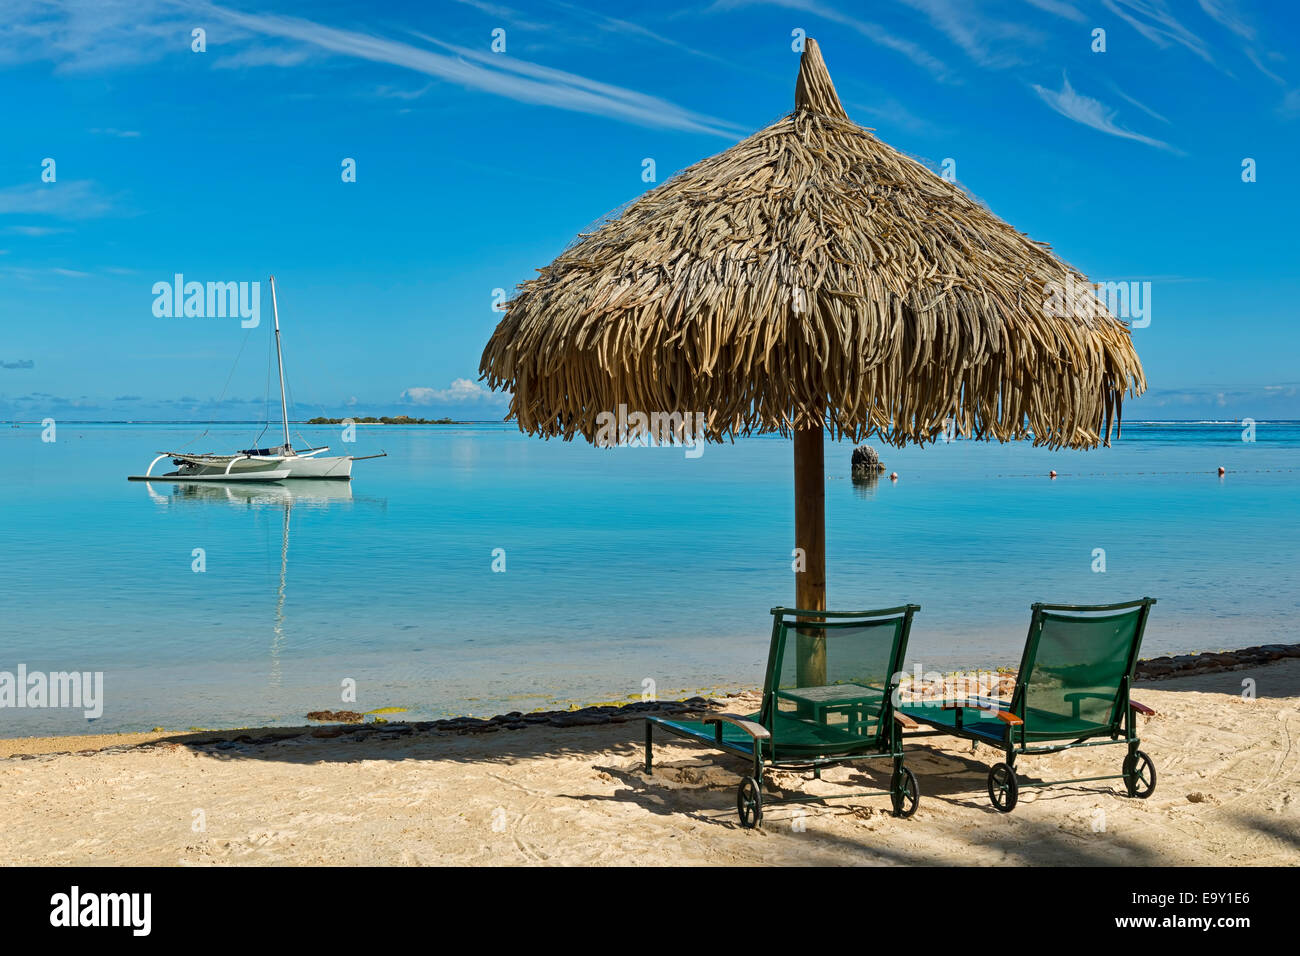 Parasol and sunloungers on the beach, Moorea, French Polynesia Stock Photo